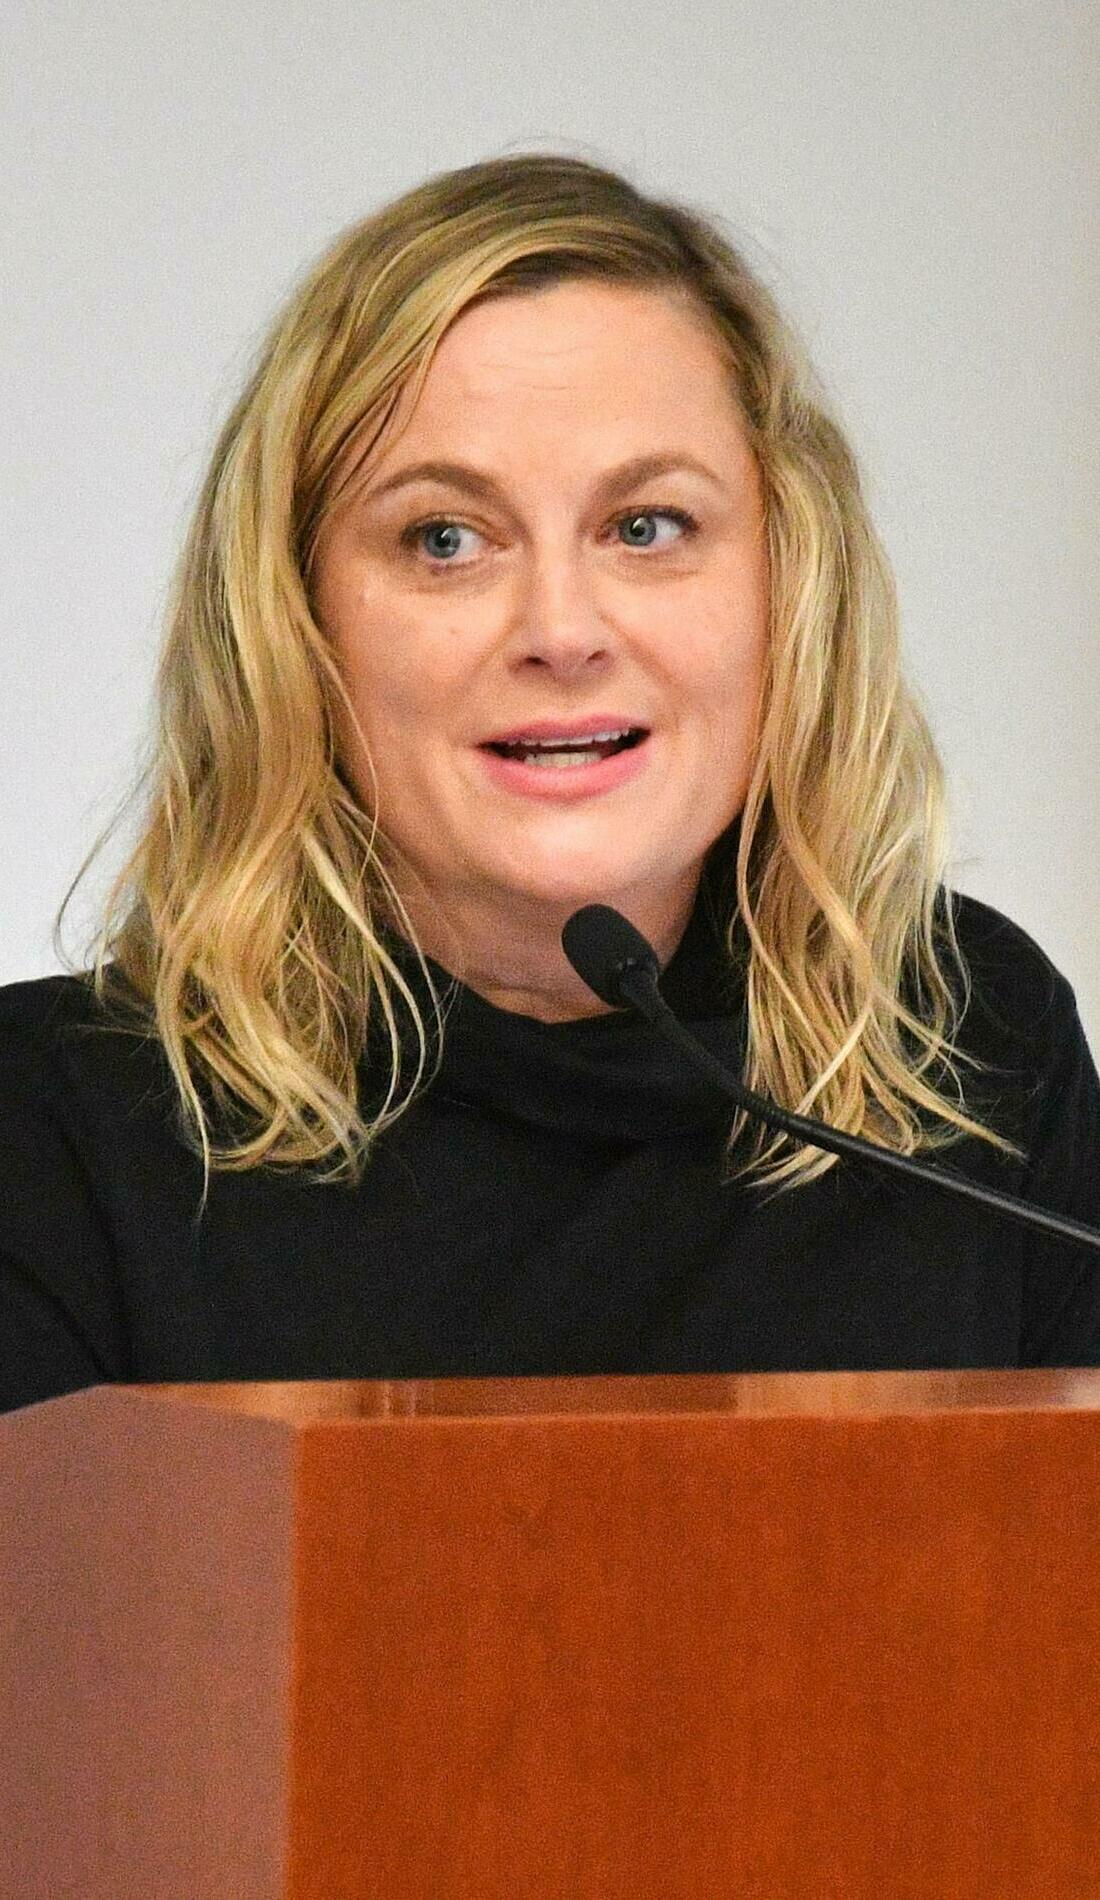 A Amy Poehler live event